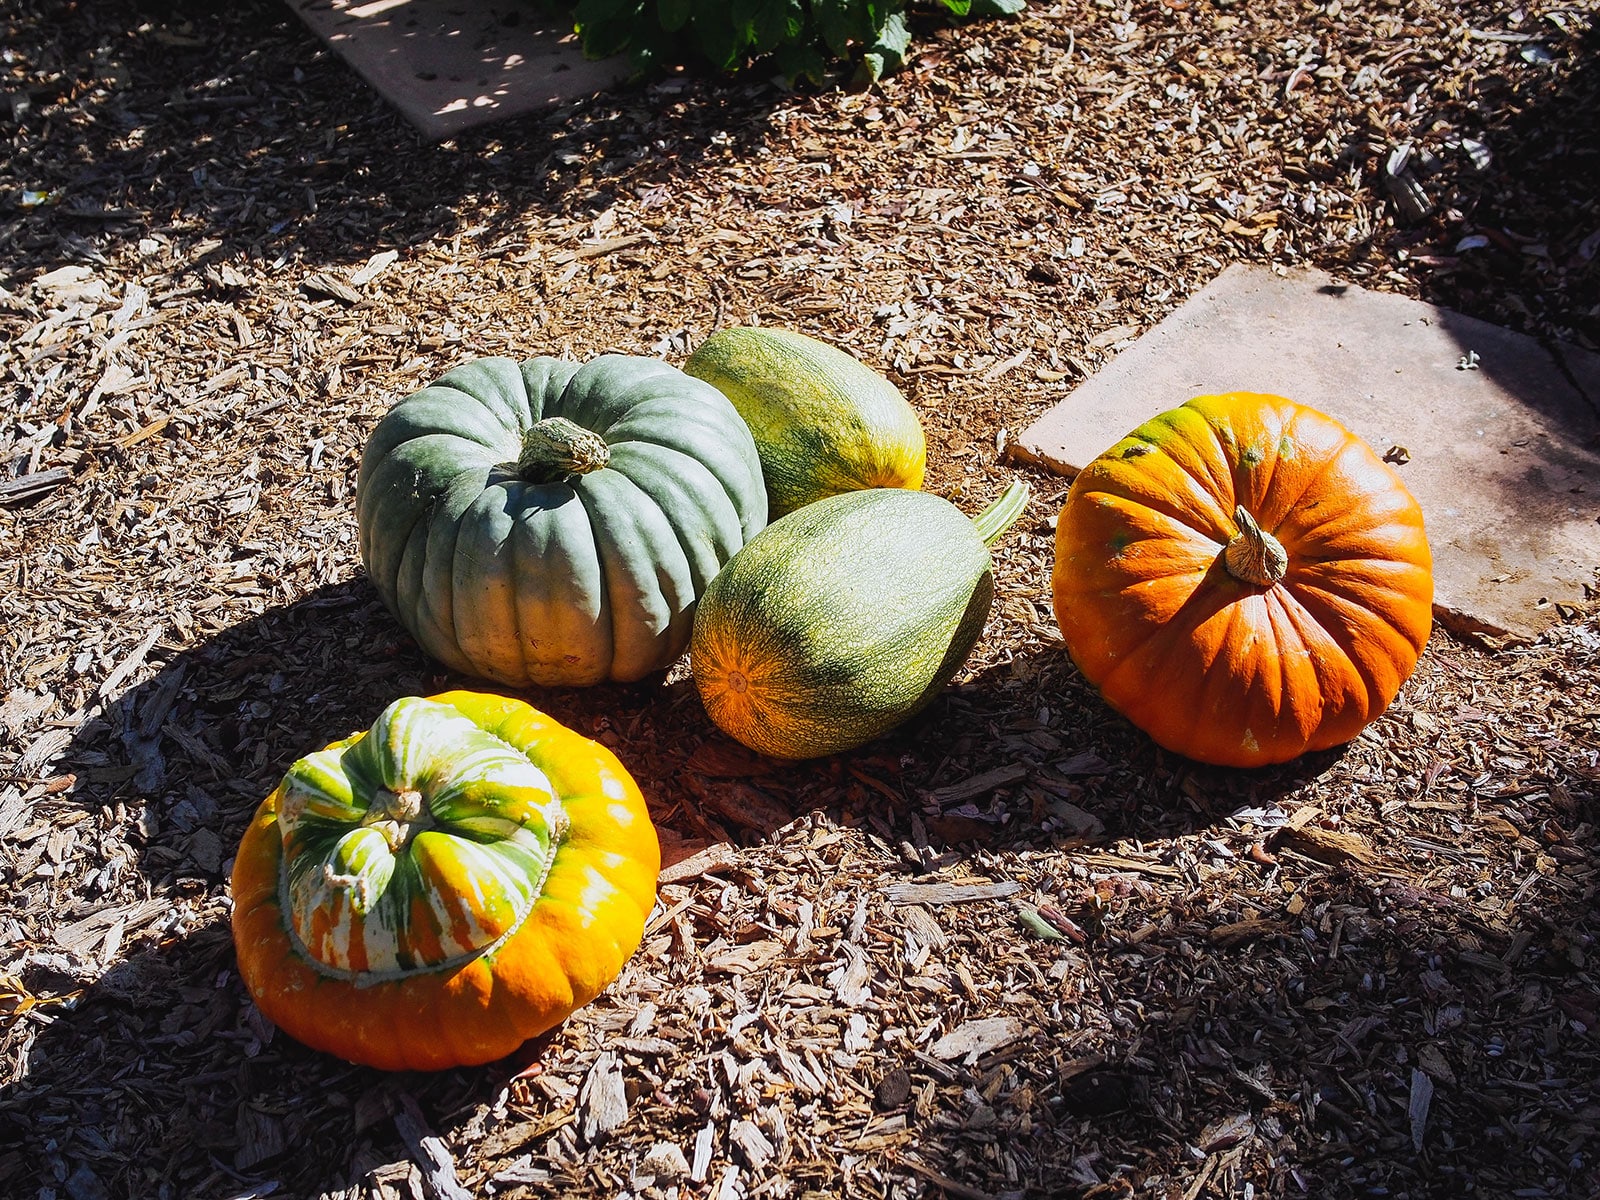 Different types of pumpkins and winter squash curing in the sun in a garden